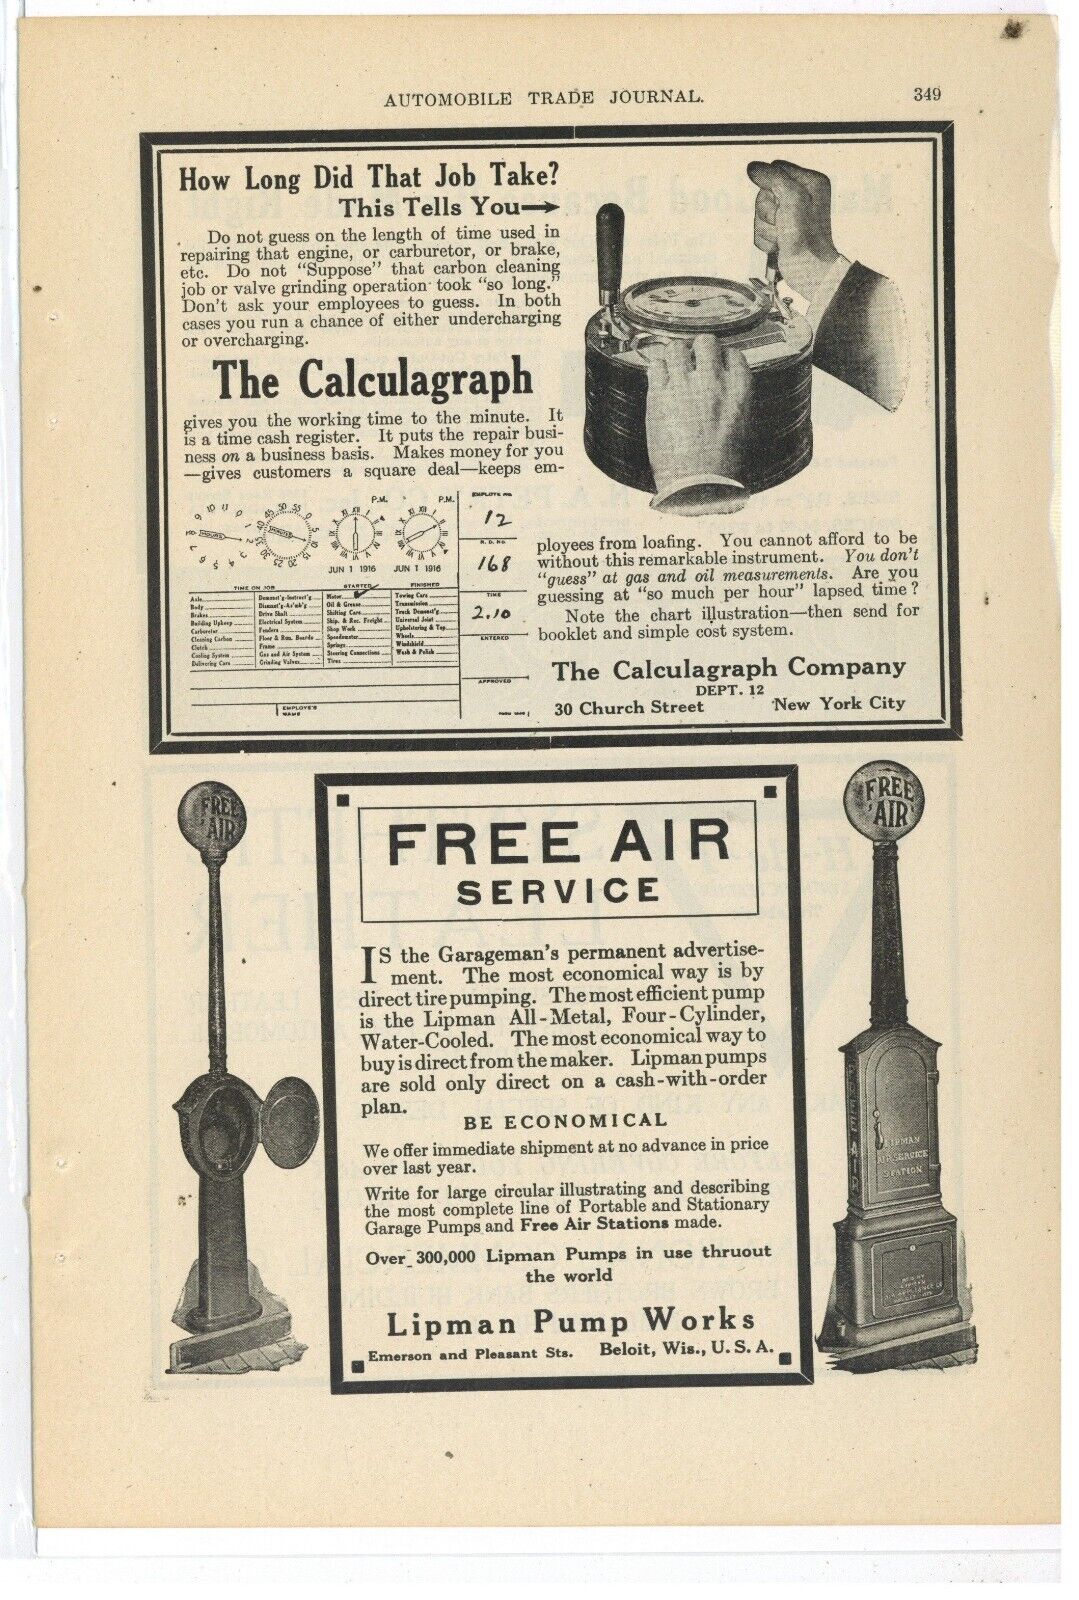 1919 Calculagraph Co. Ad: Time Calculator for Repair Bills - New York